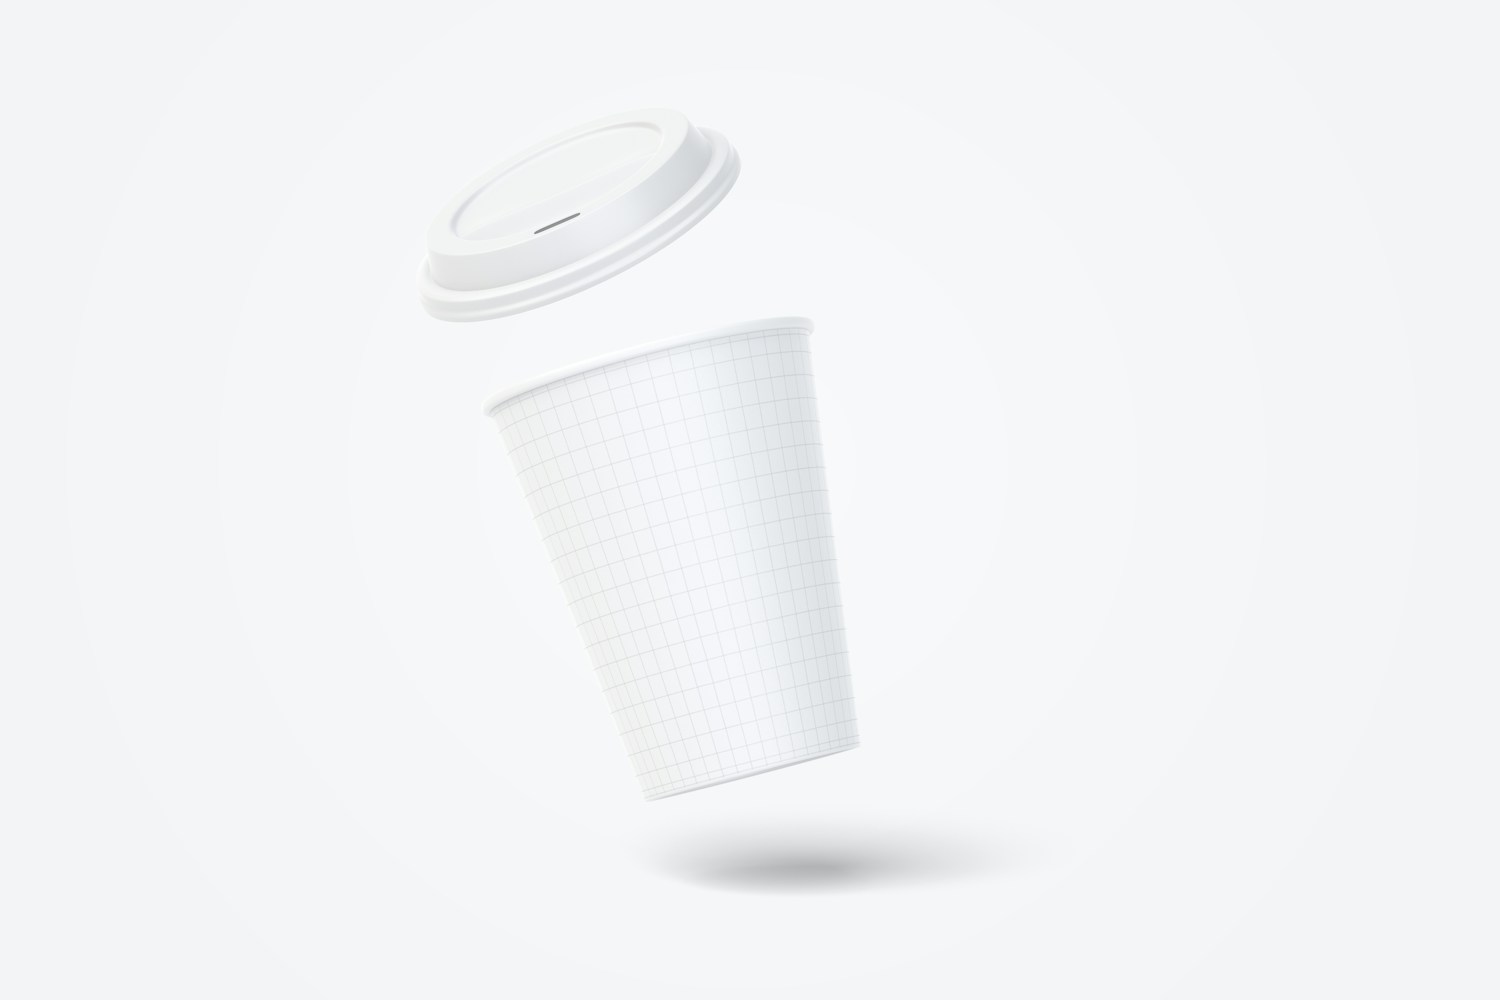 12oz Paper Coffee Cup Mockup, Floating